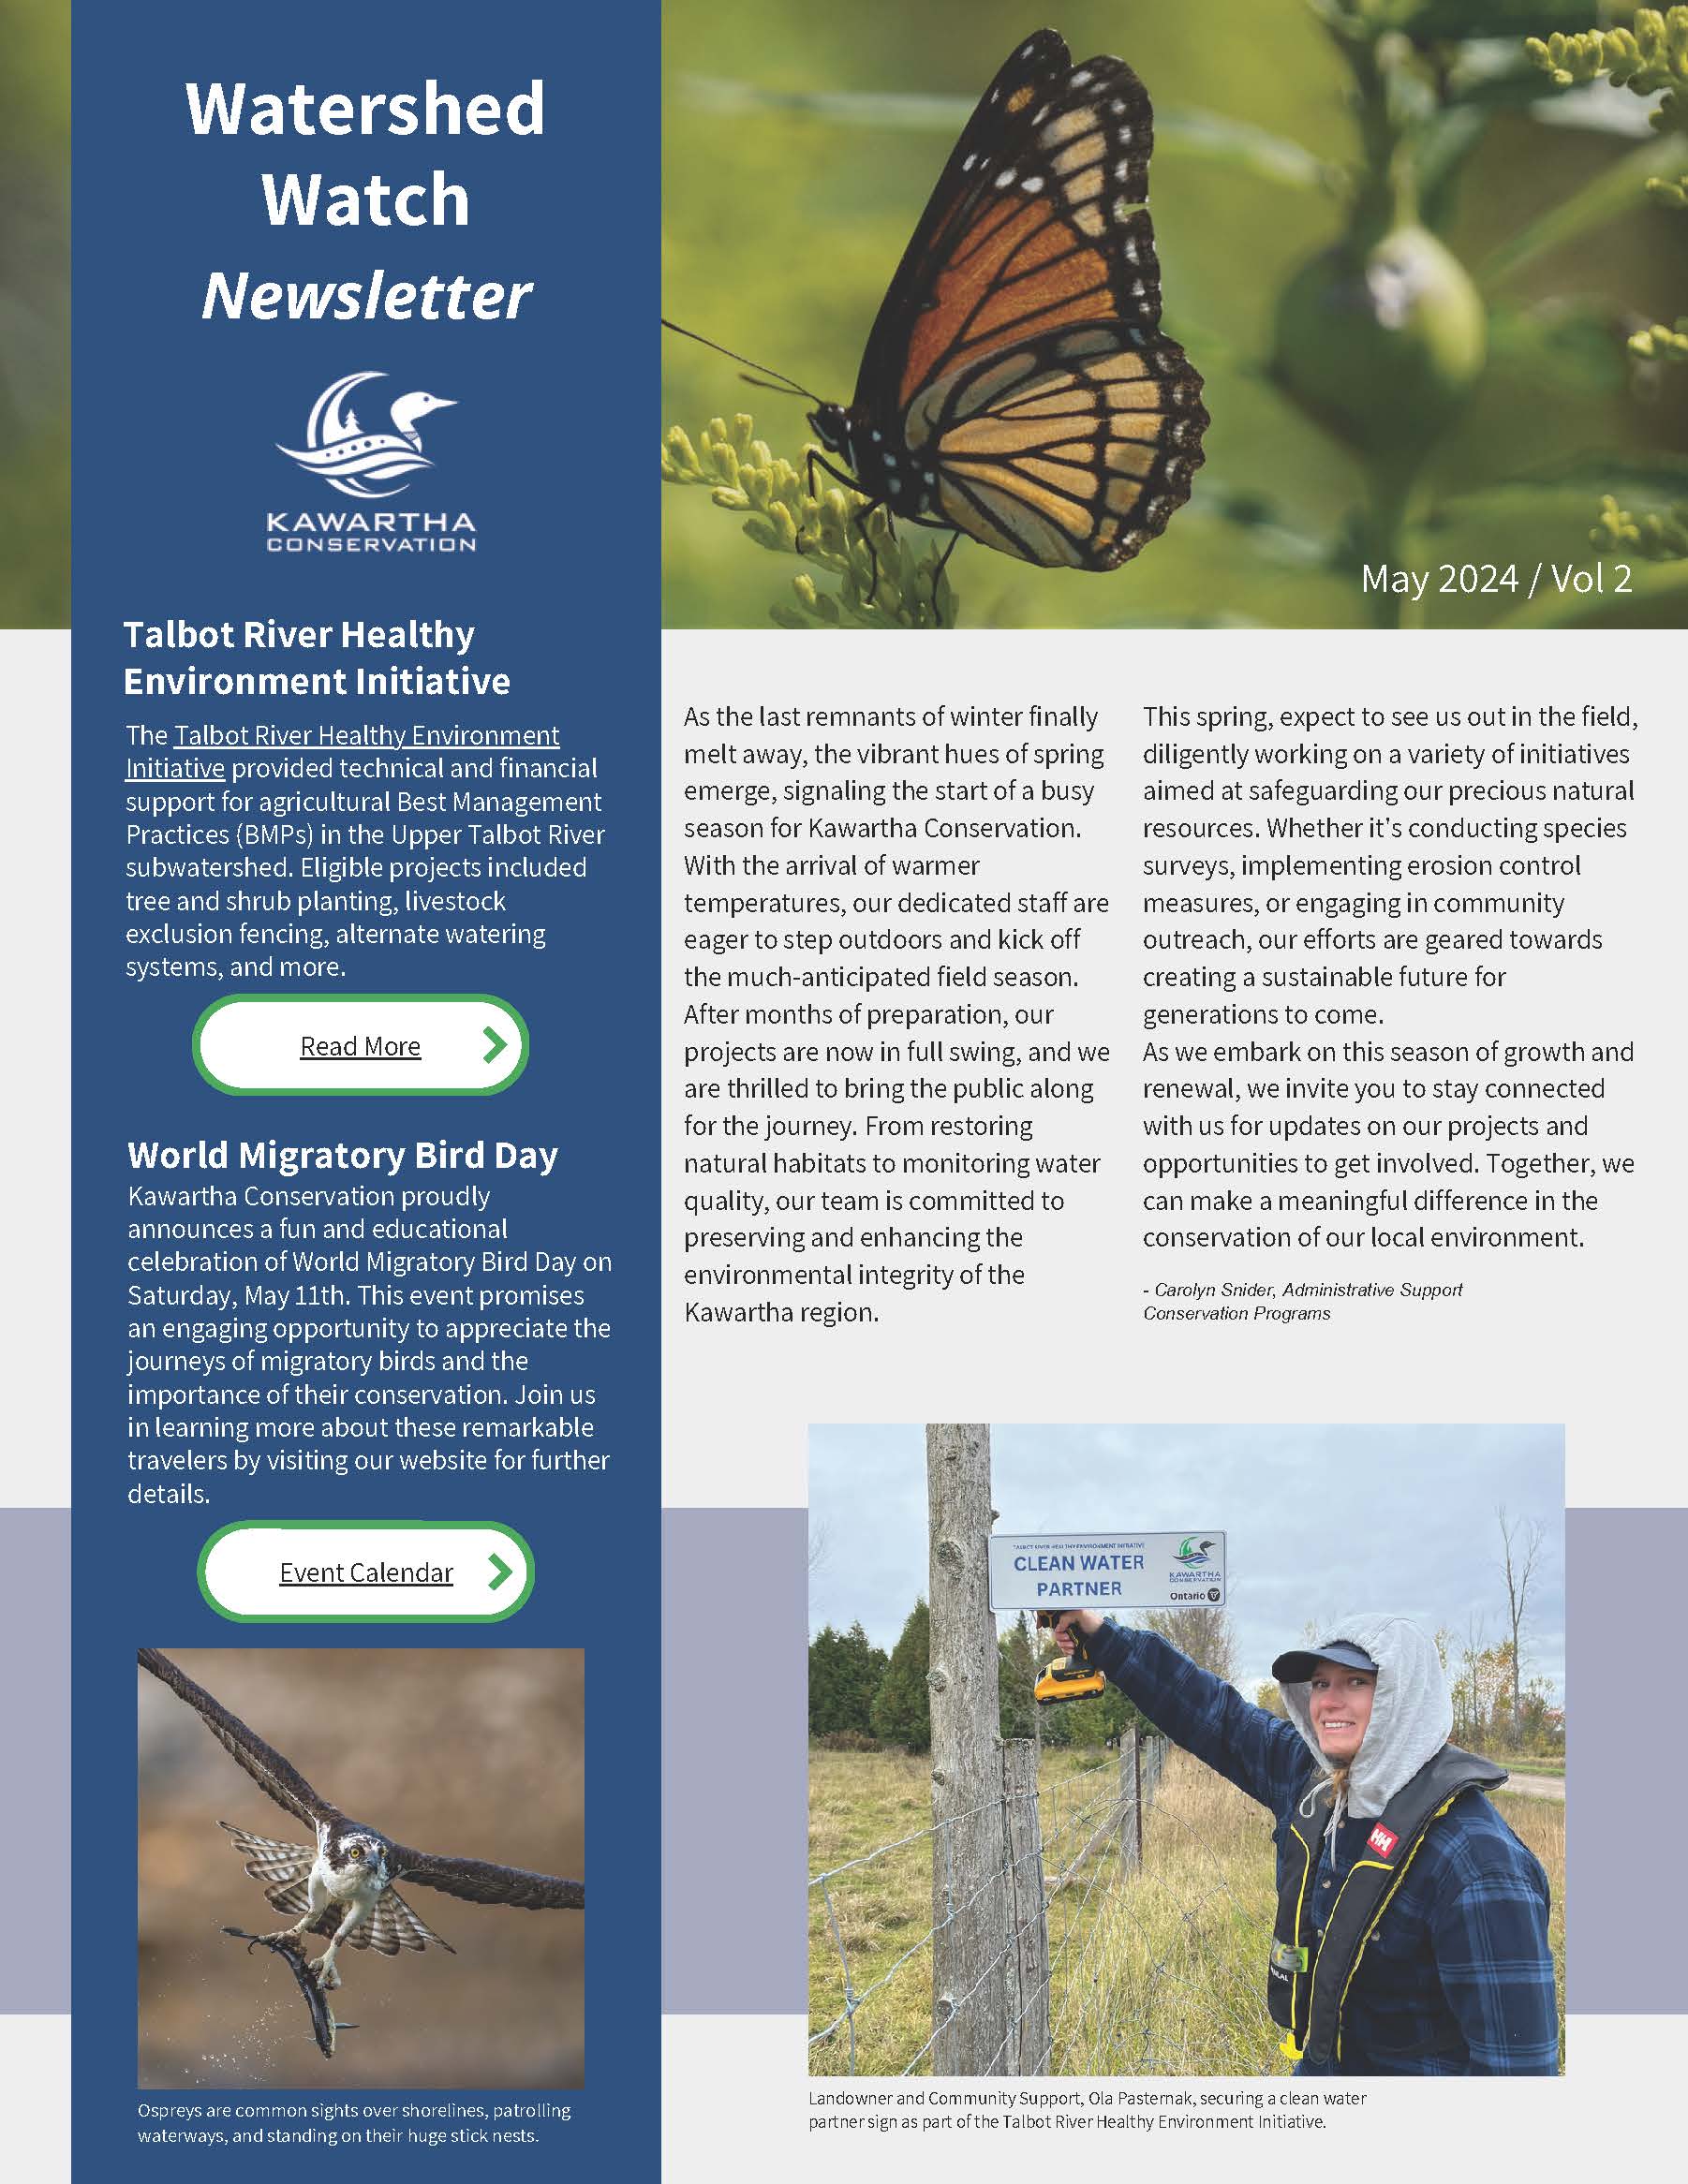 Watershed Watch Newsletter cover page image